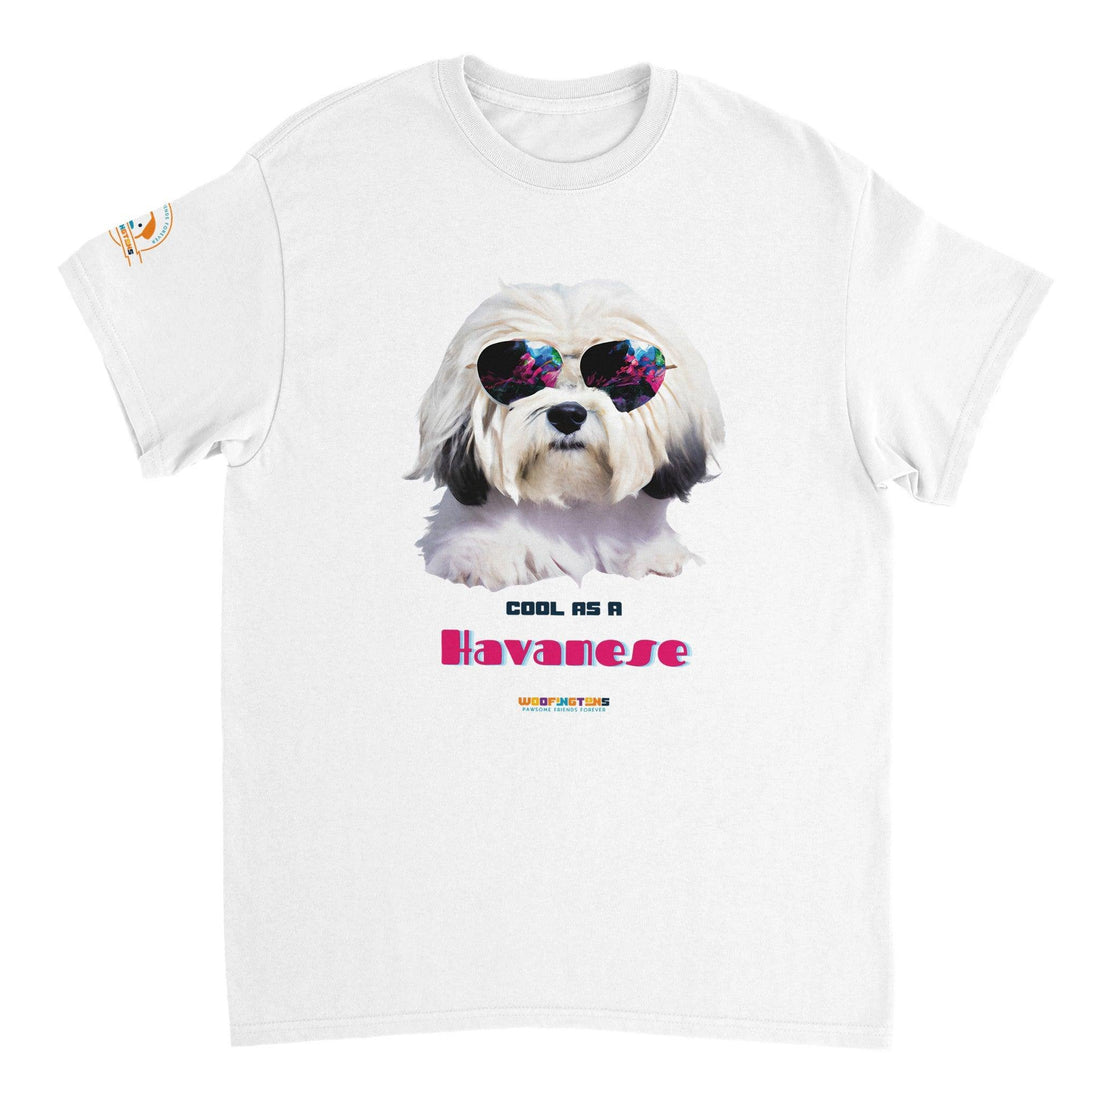 &quot;Cool as a Havanese” - Cool Dog T-Shirt - Woofingtons